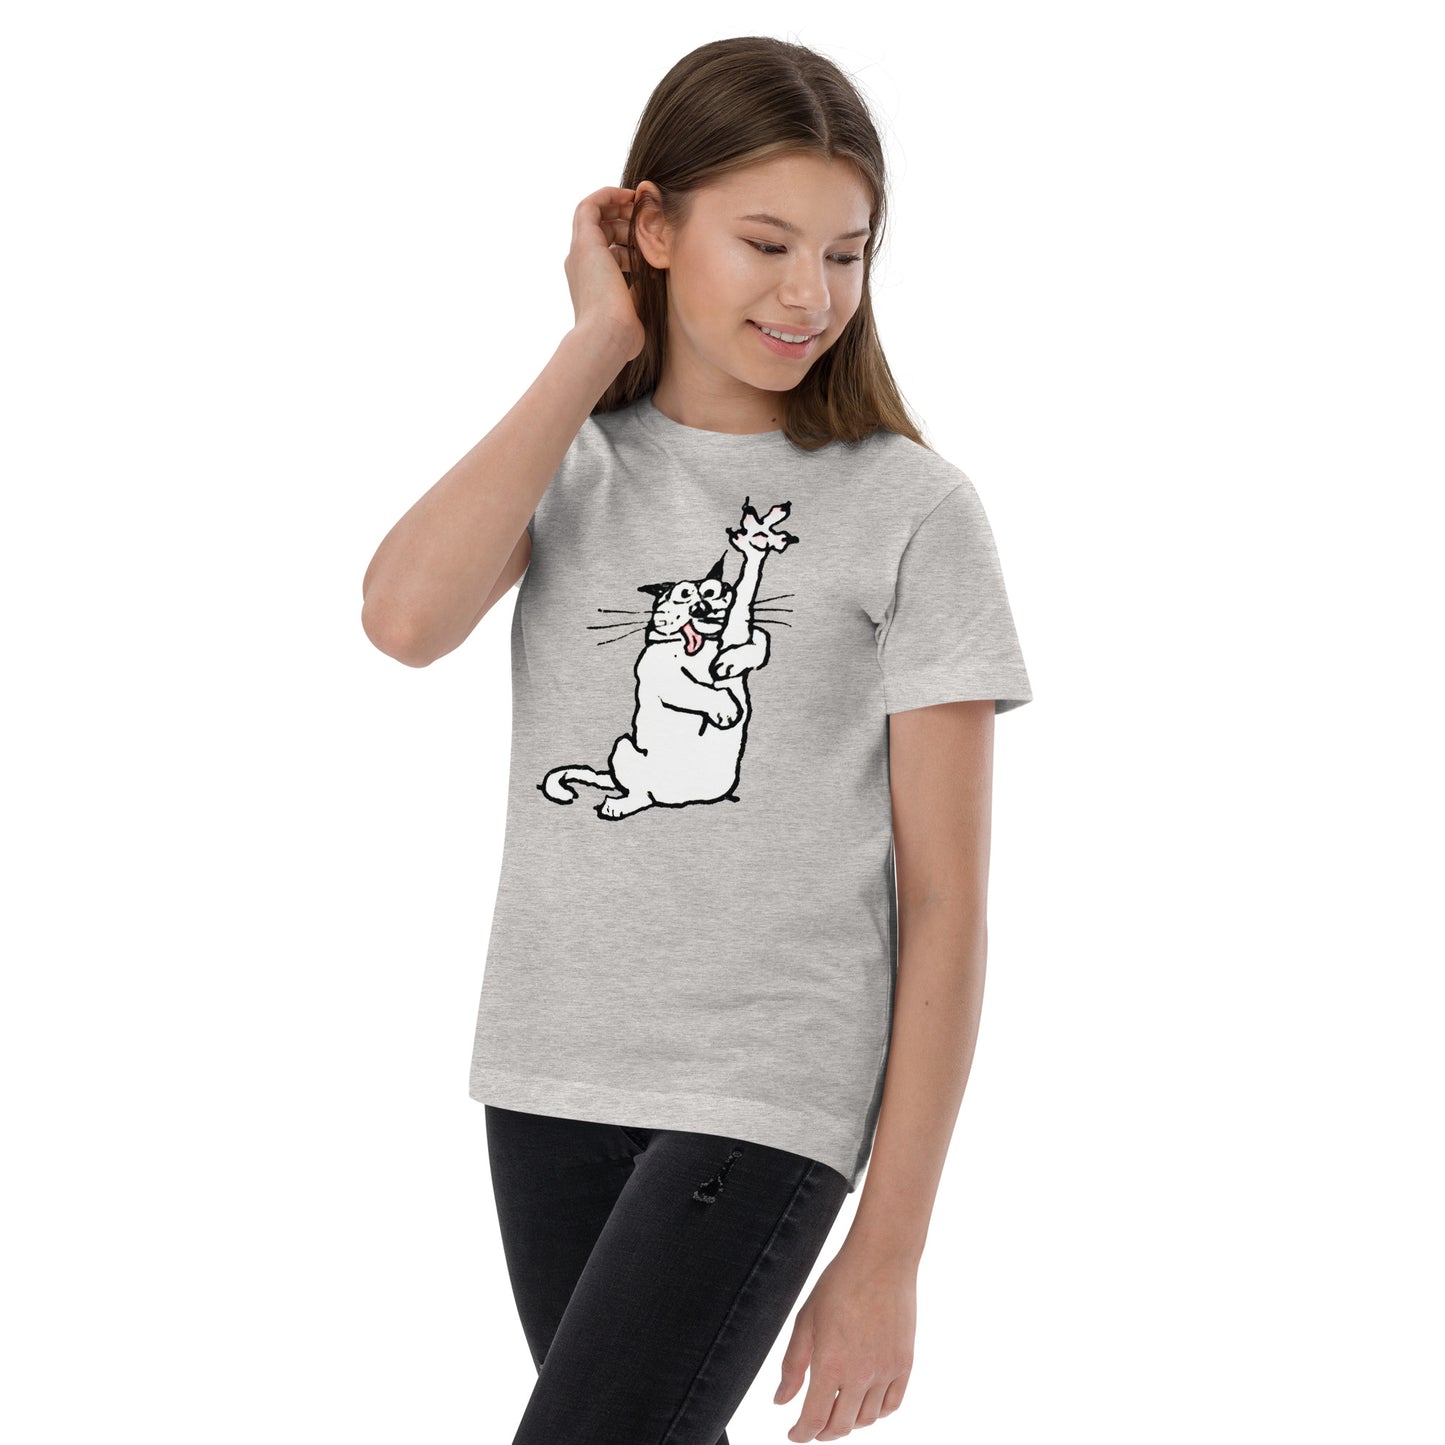 The American Bystander | Crazy Cat Kid's T-shirt by George Booth